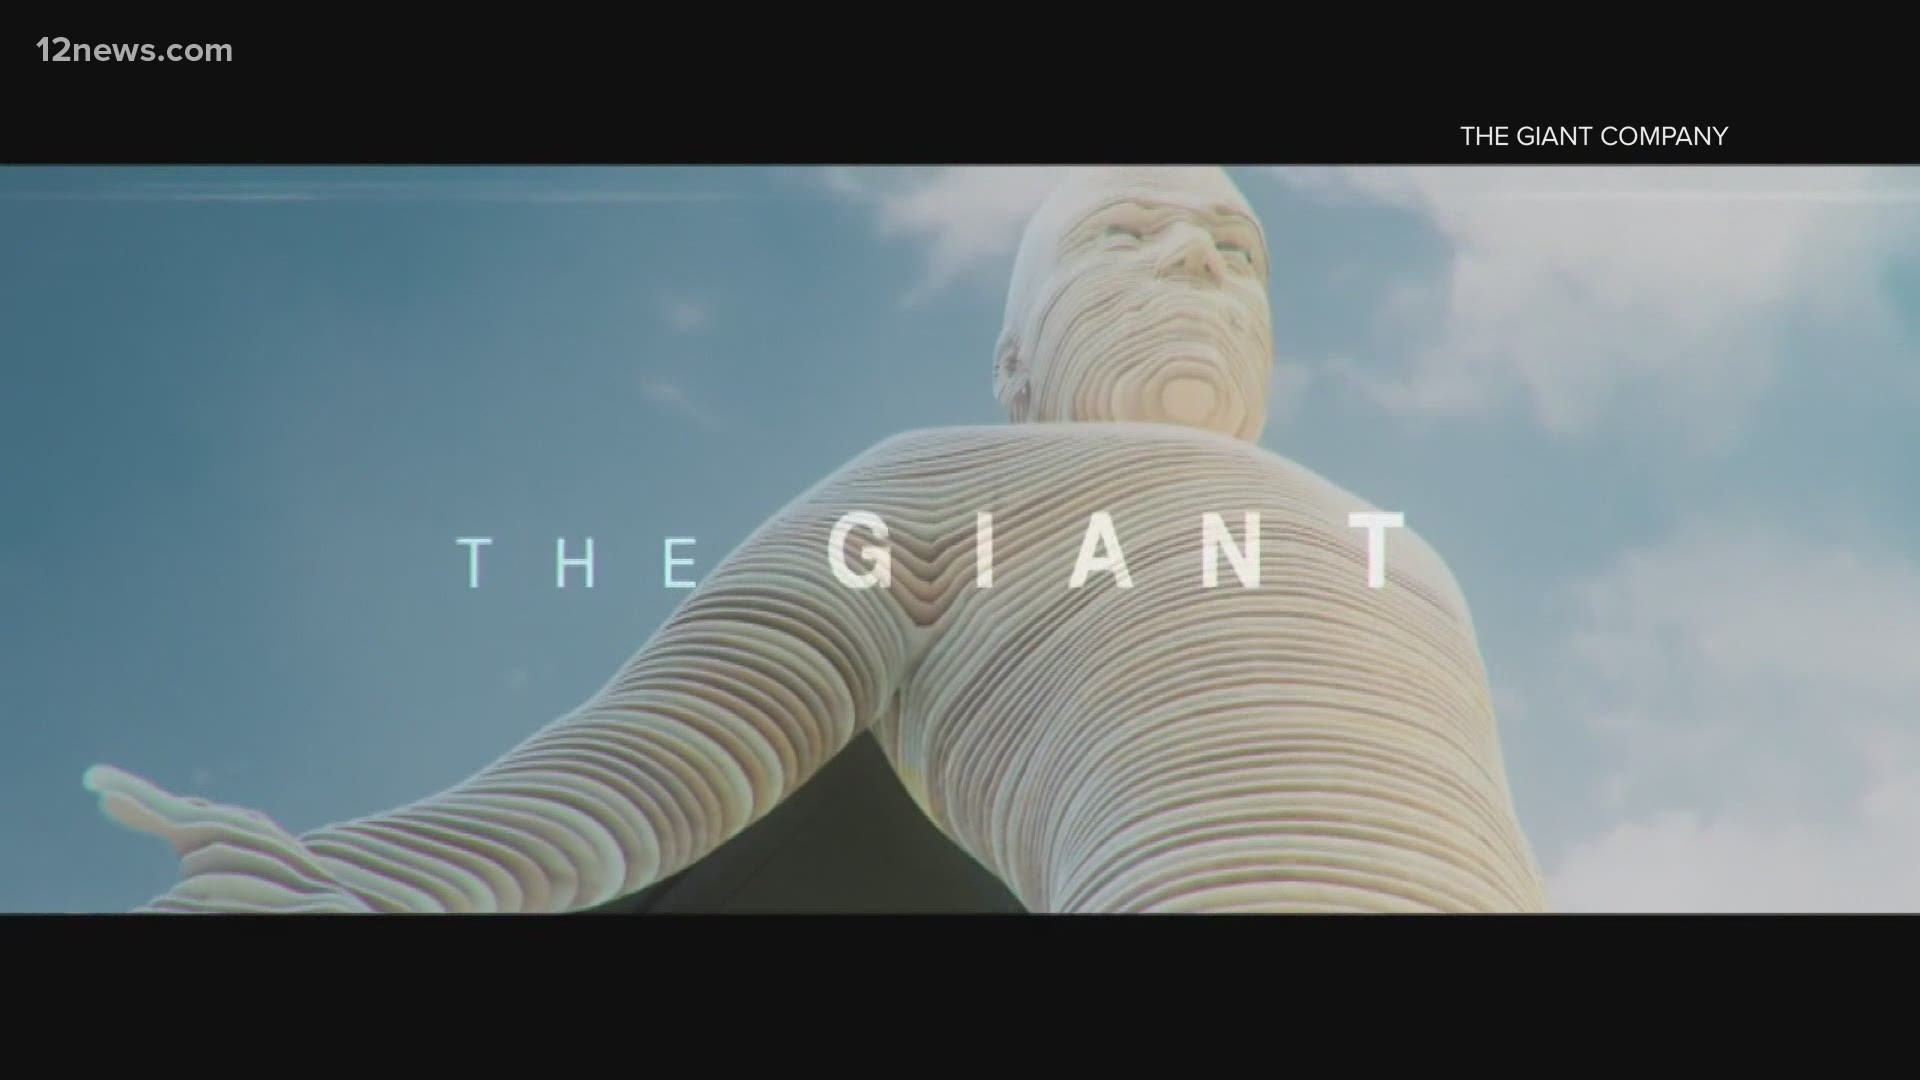 An Irish company hoping to install the world’s largest moving sculpture within city limits. The sculpture is known as "The Giant" and would be 10 stories tall.